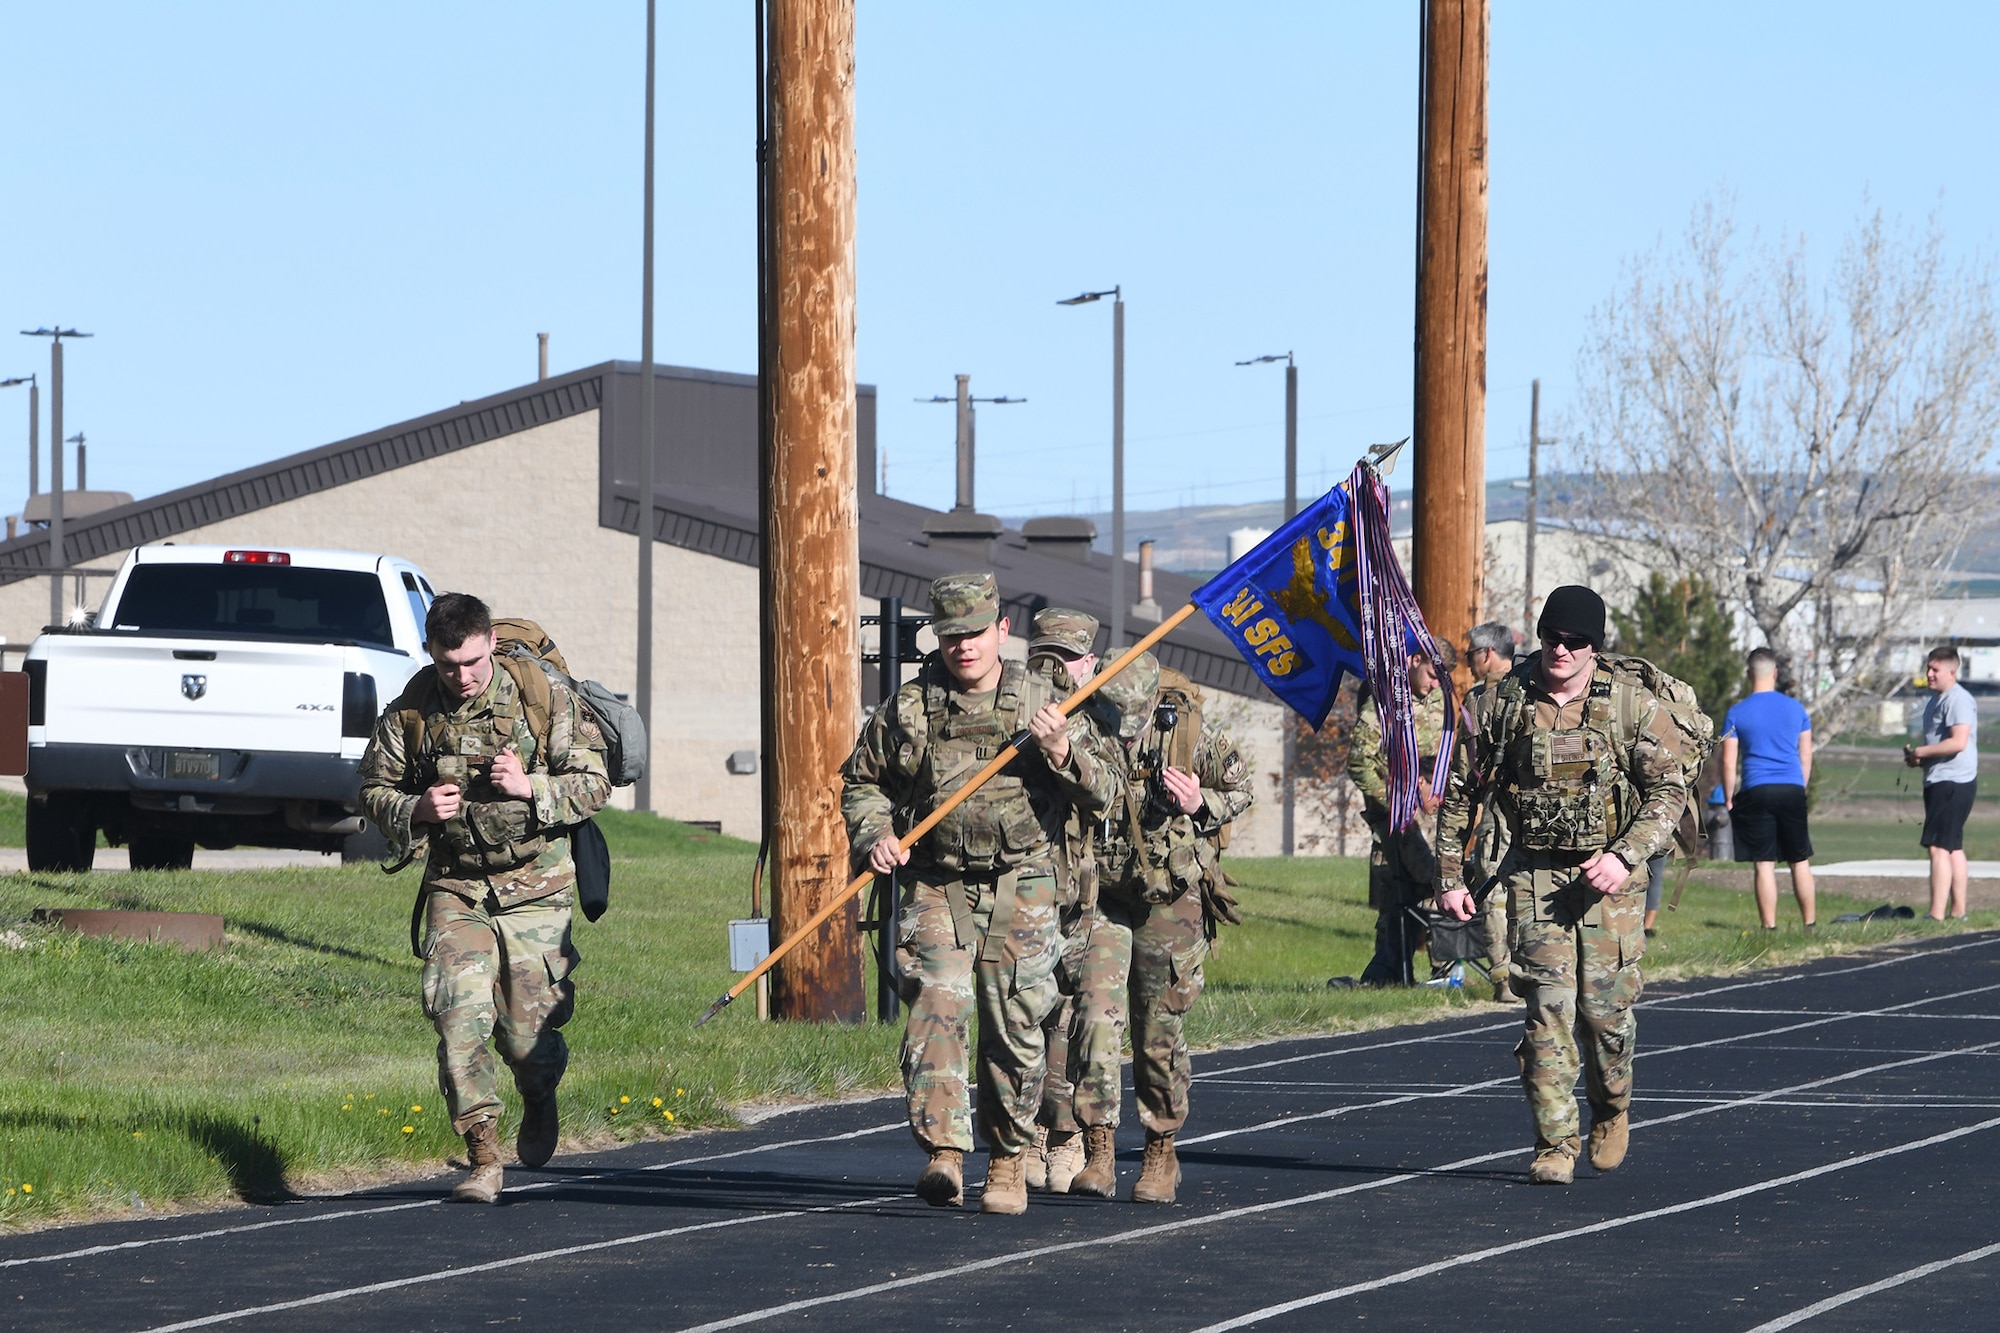 Airmen take part in a ruck march in honor of fallen defenders May 14, 2020, at Malmstrom Air Force Base, Mont.